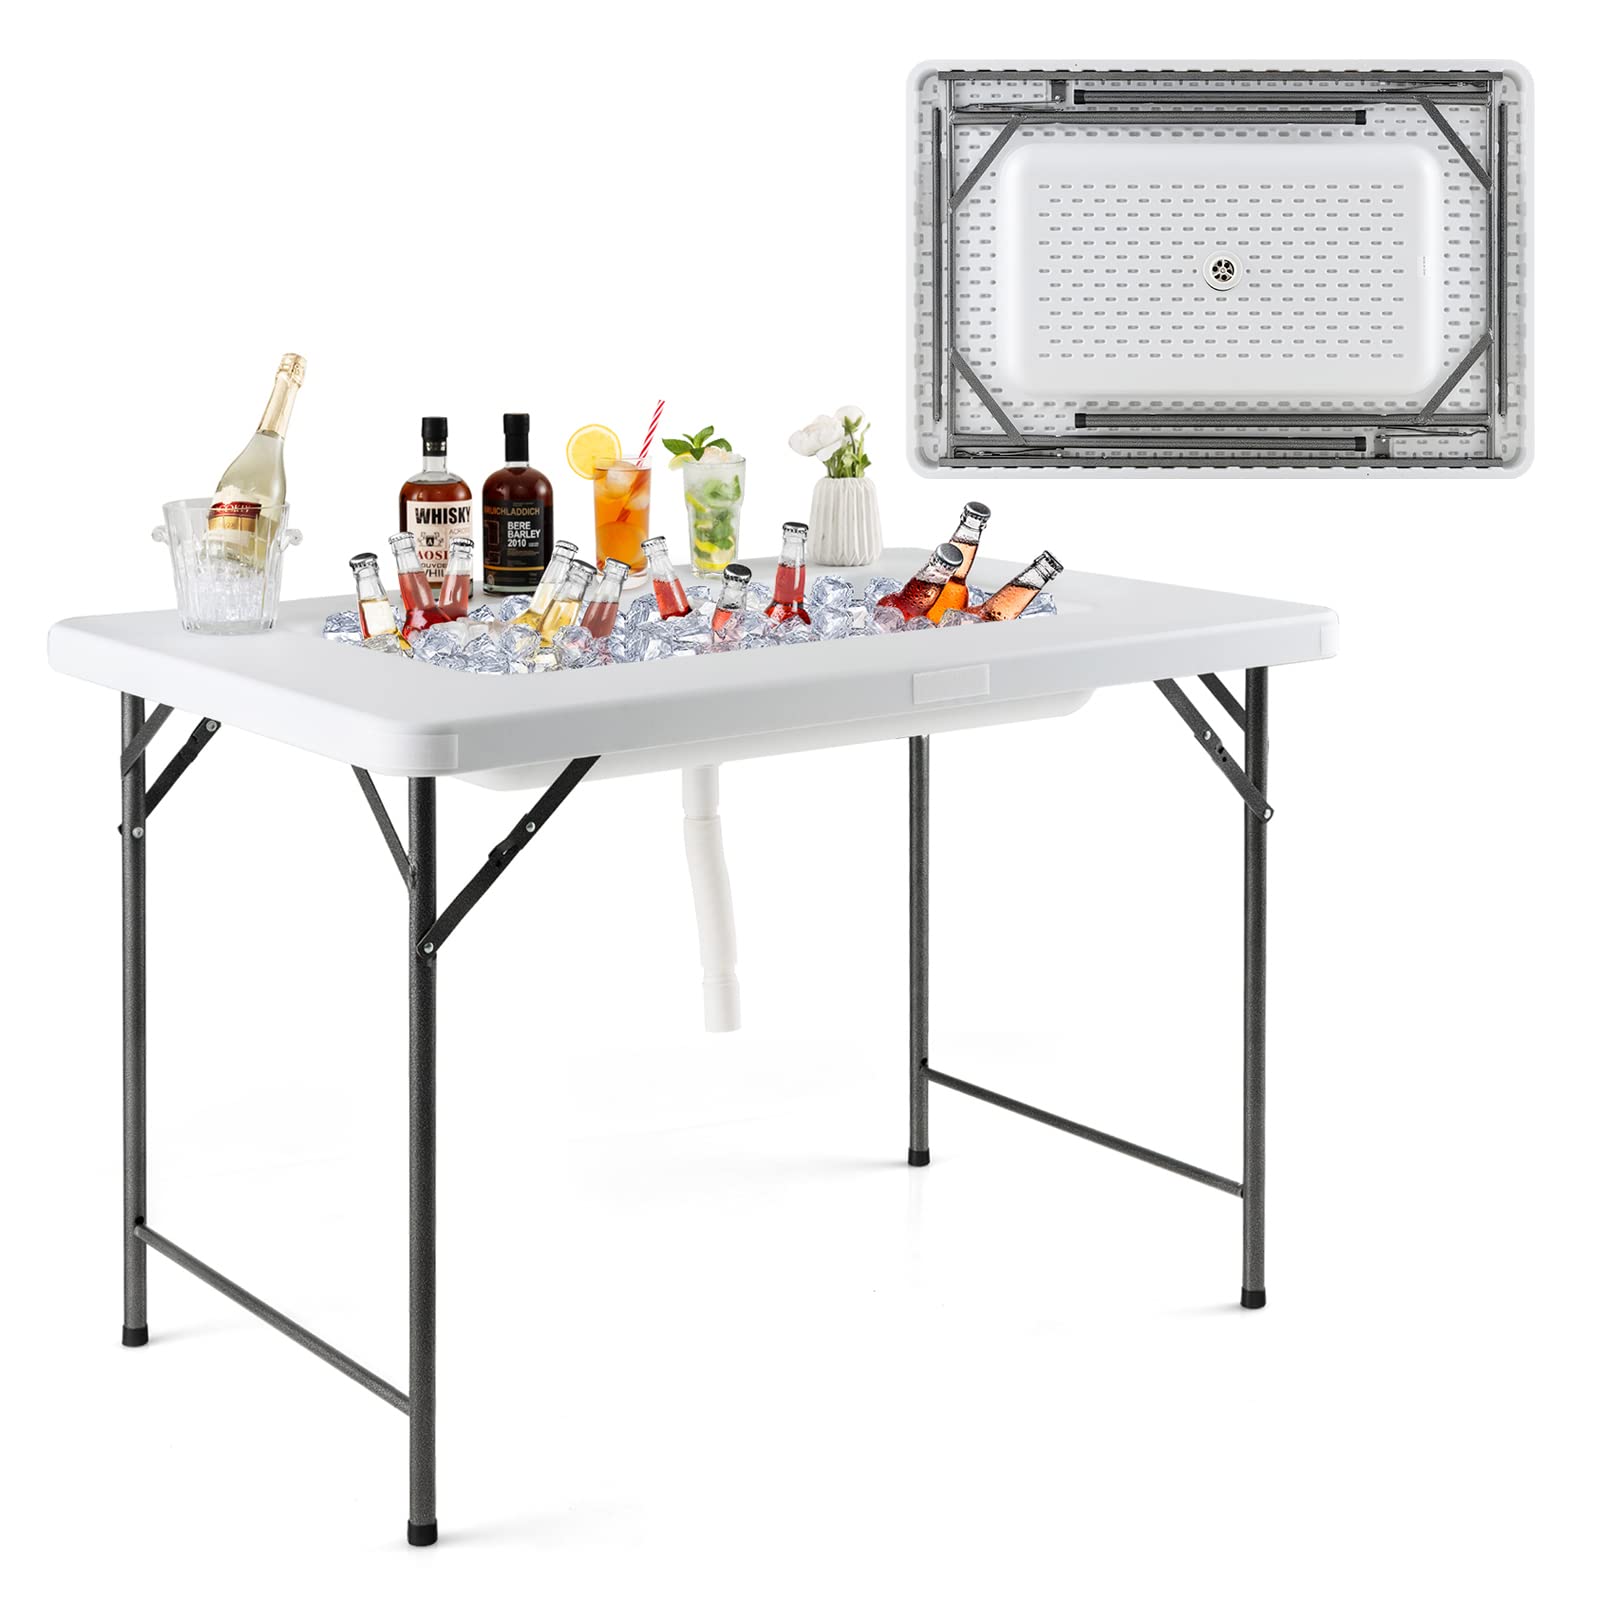 Giantex 4Ft Folding Ice Cooler Table with Drain - No Assembly Ice Bin Table with Edge and Removable Matching Skit